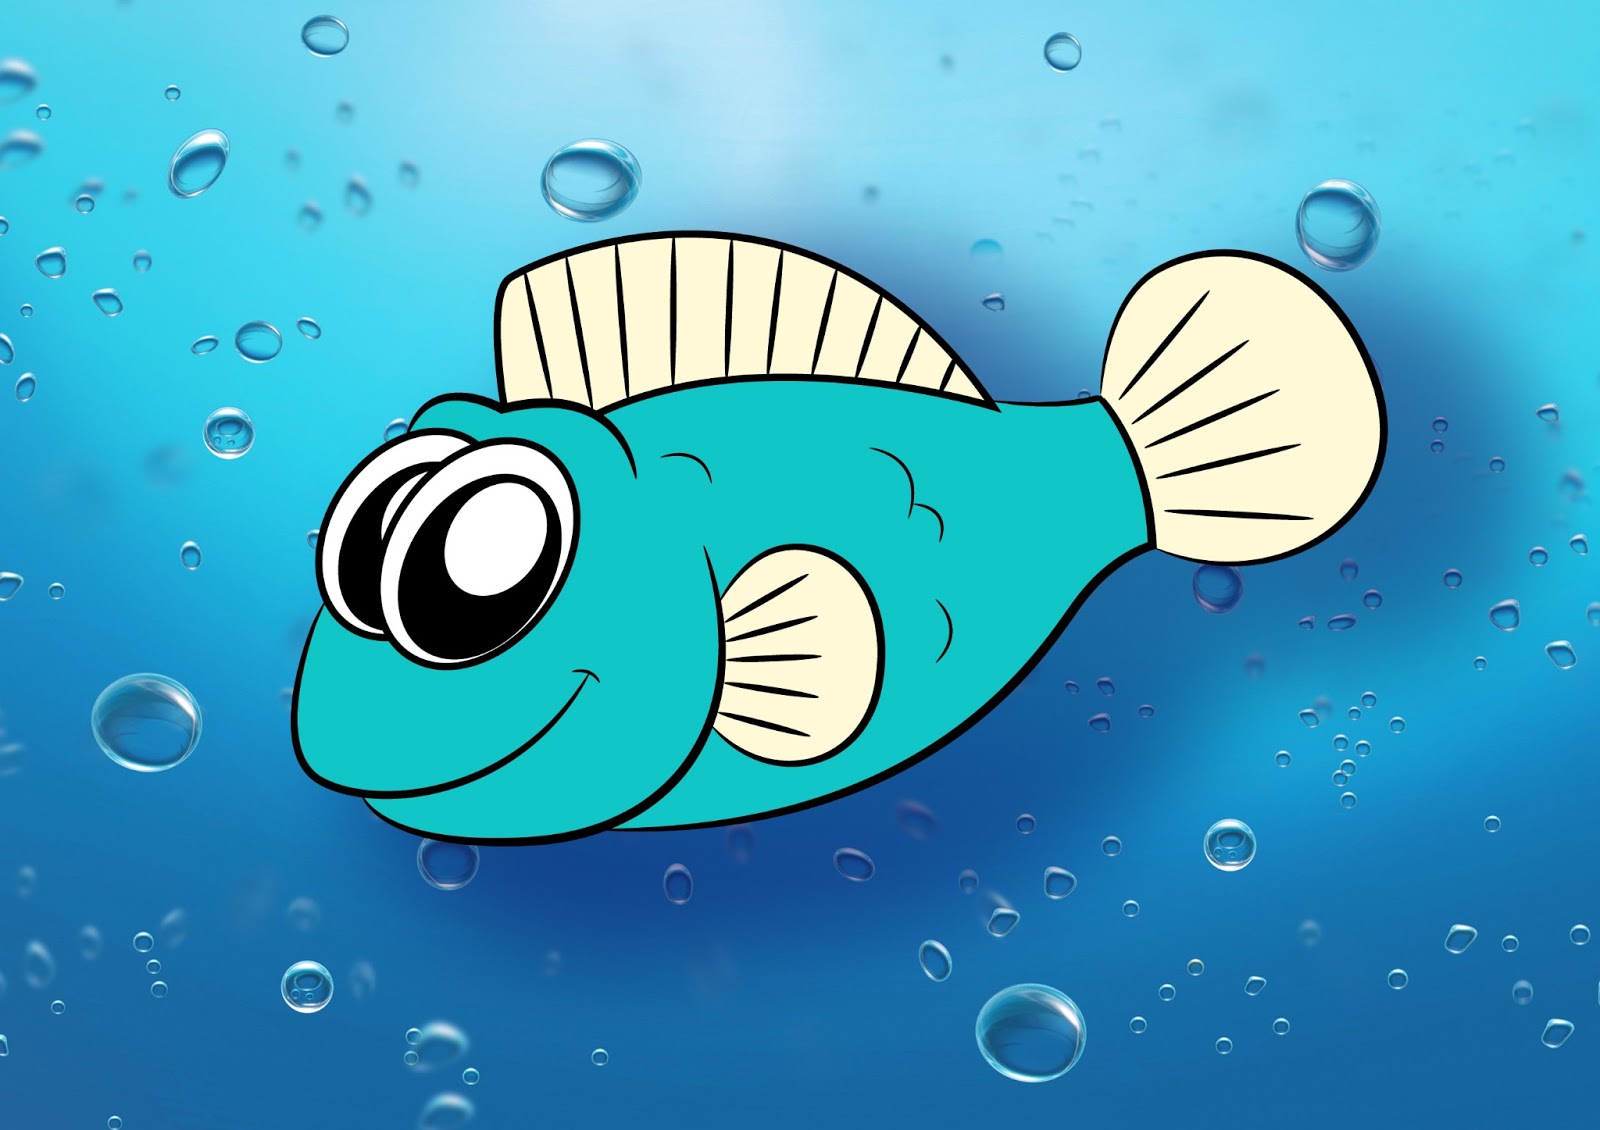 Color your cartoon fish whatever color you like and give him some water to swim in!